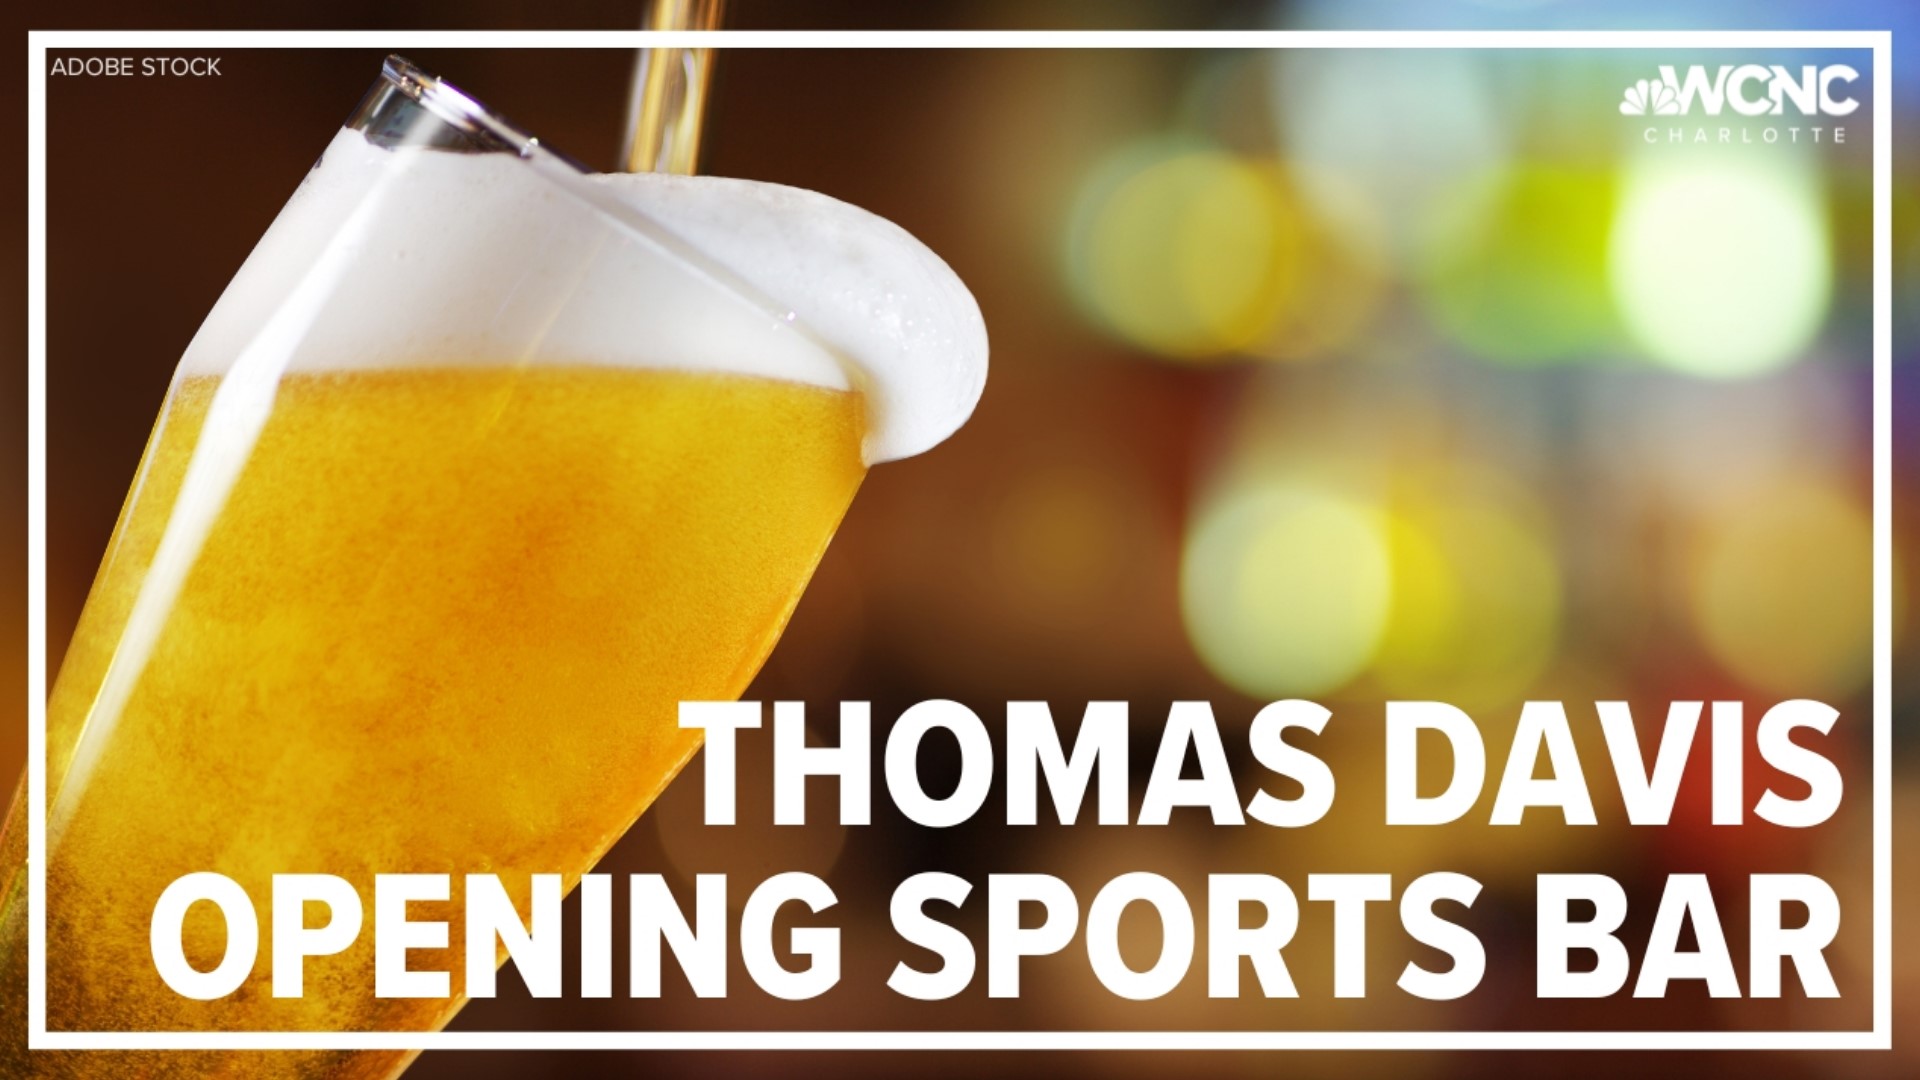 Carolina Panthers legend Thomas Davis will officially open his new sports bar in Uptown Wednesday night.